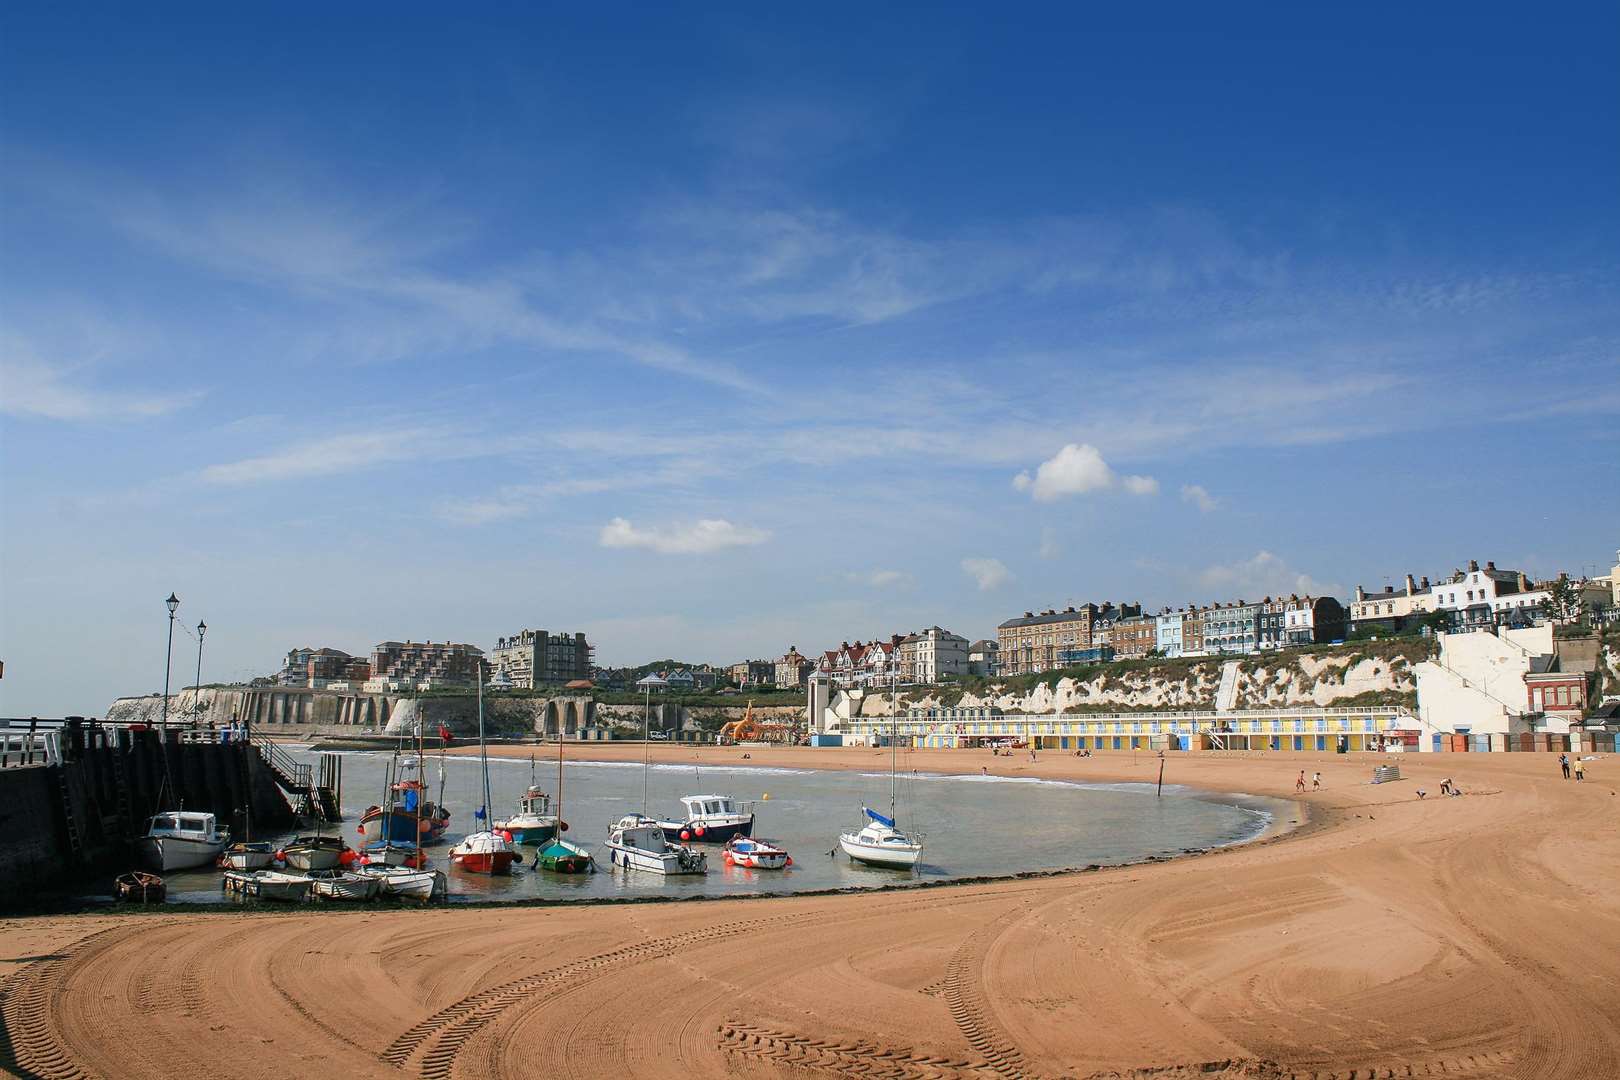 Broadstairs has been ranked the coolest place to live in Kent thanks to its colourful beach huts and independent shops